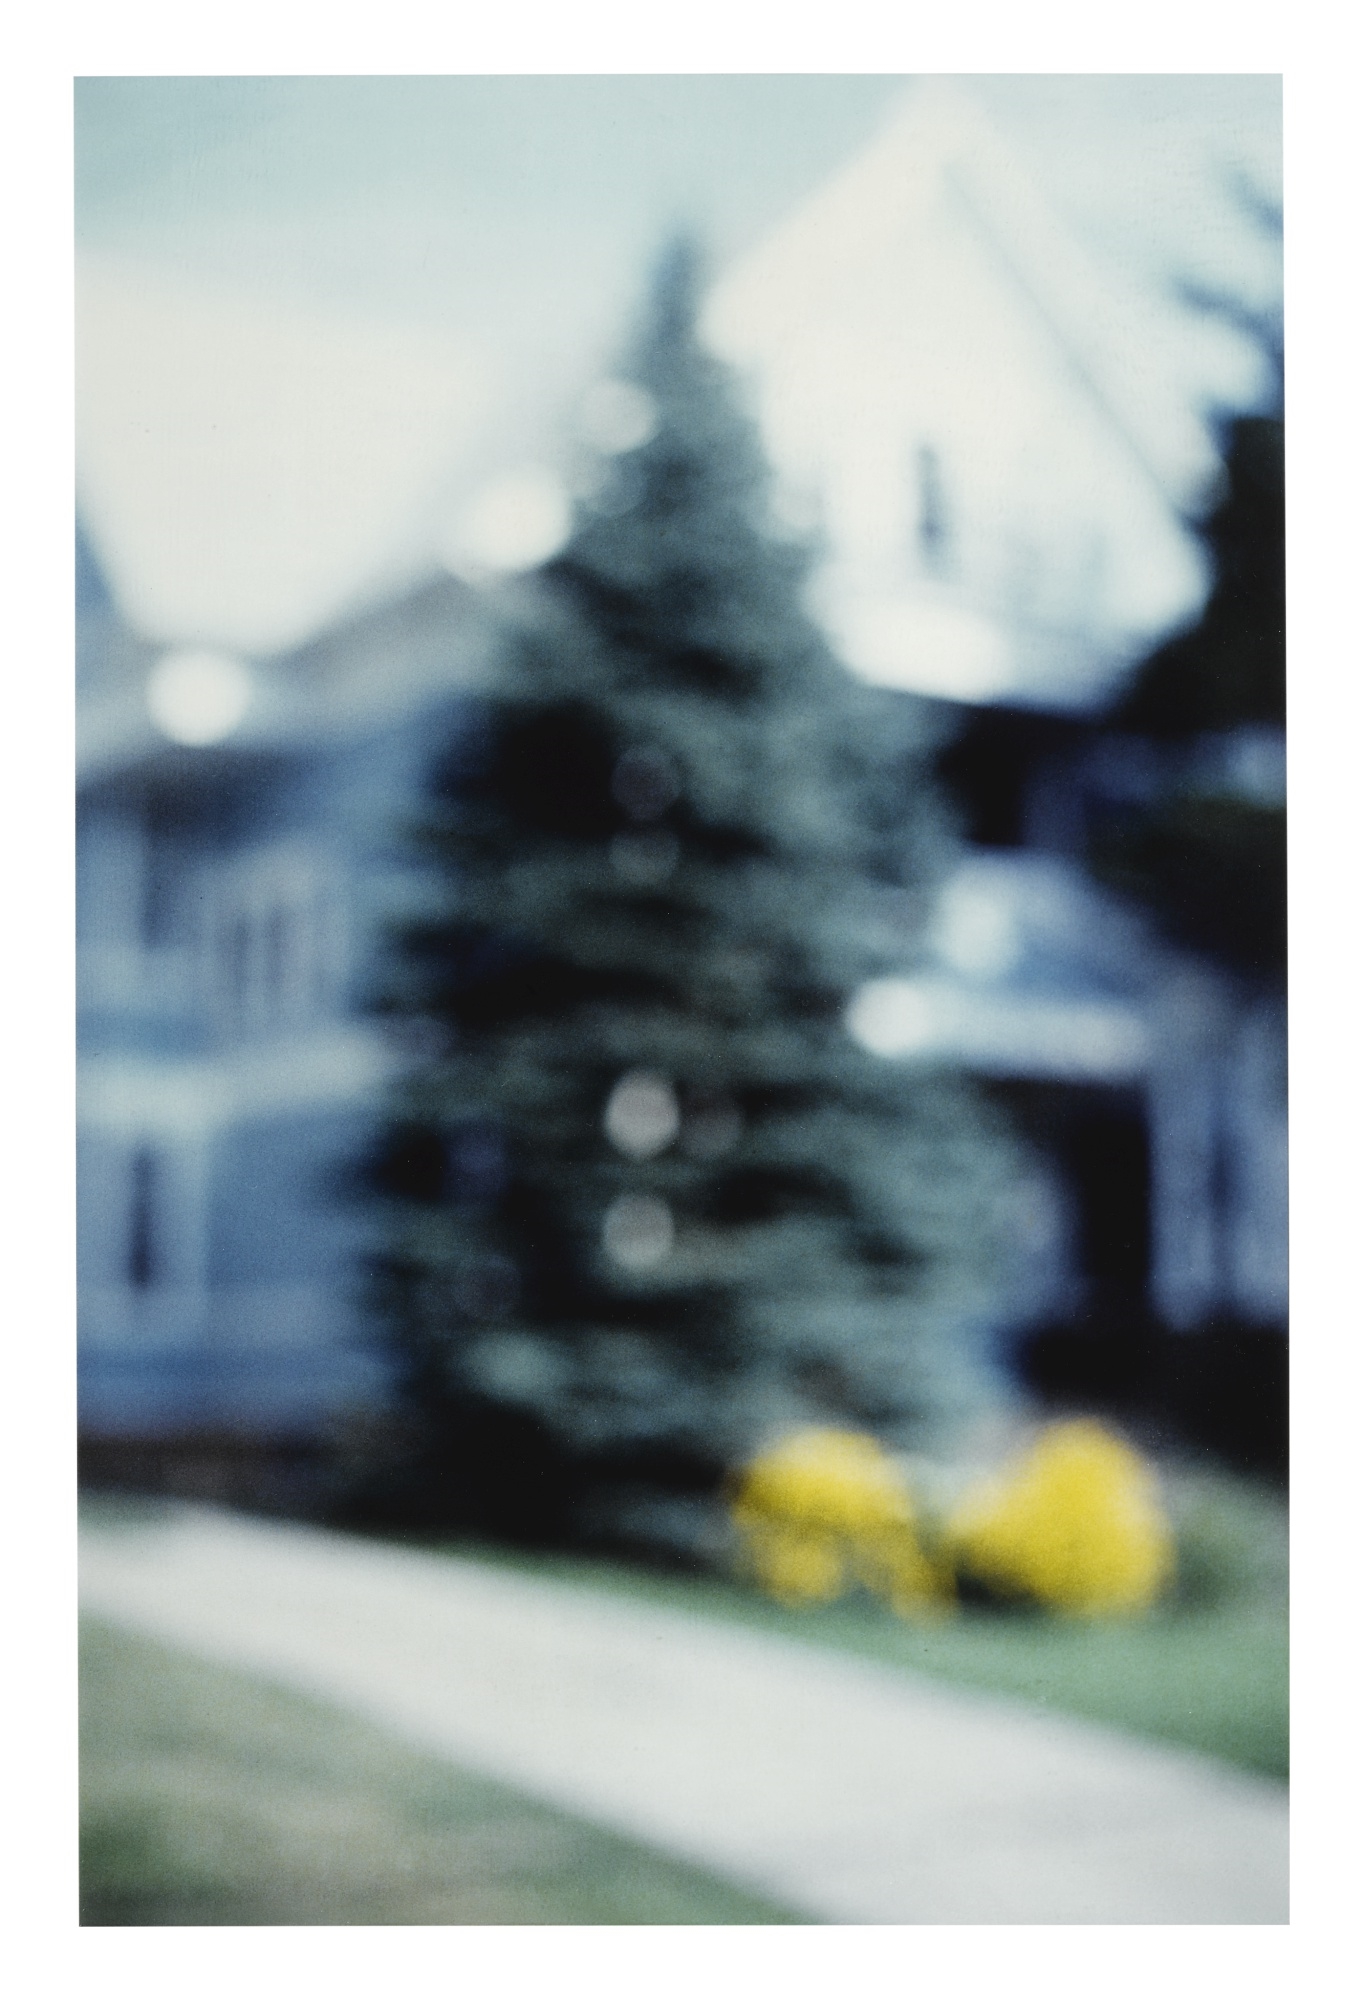 'HOUSE WITH TREE, NEW HAVEN' by David Armstrong, 1997